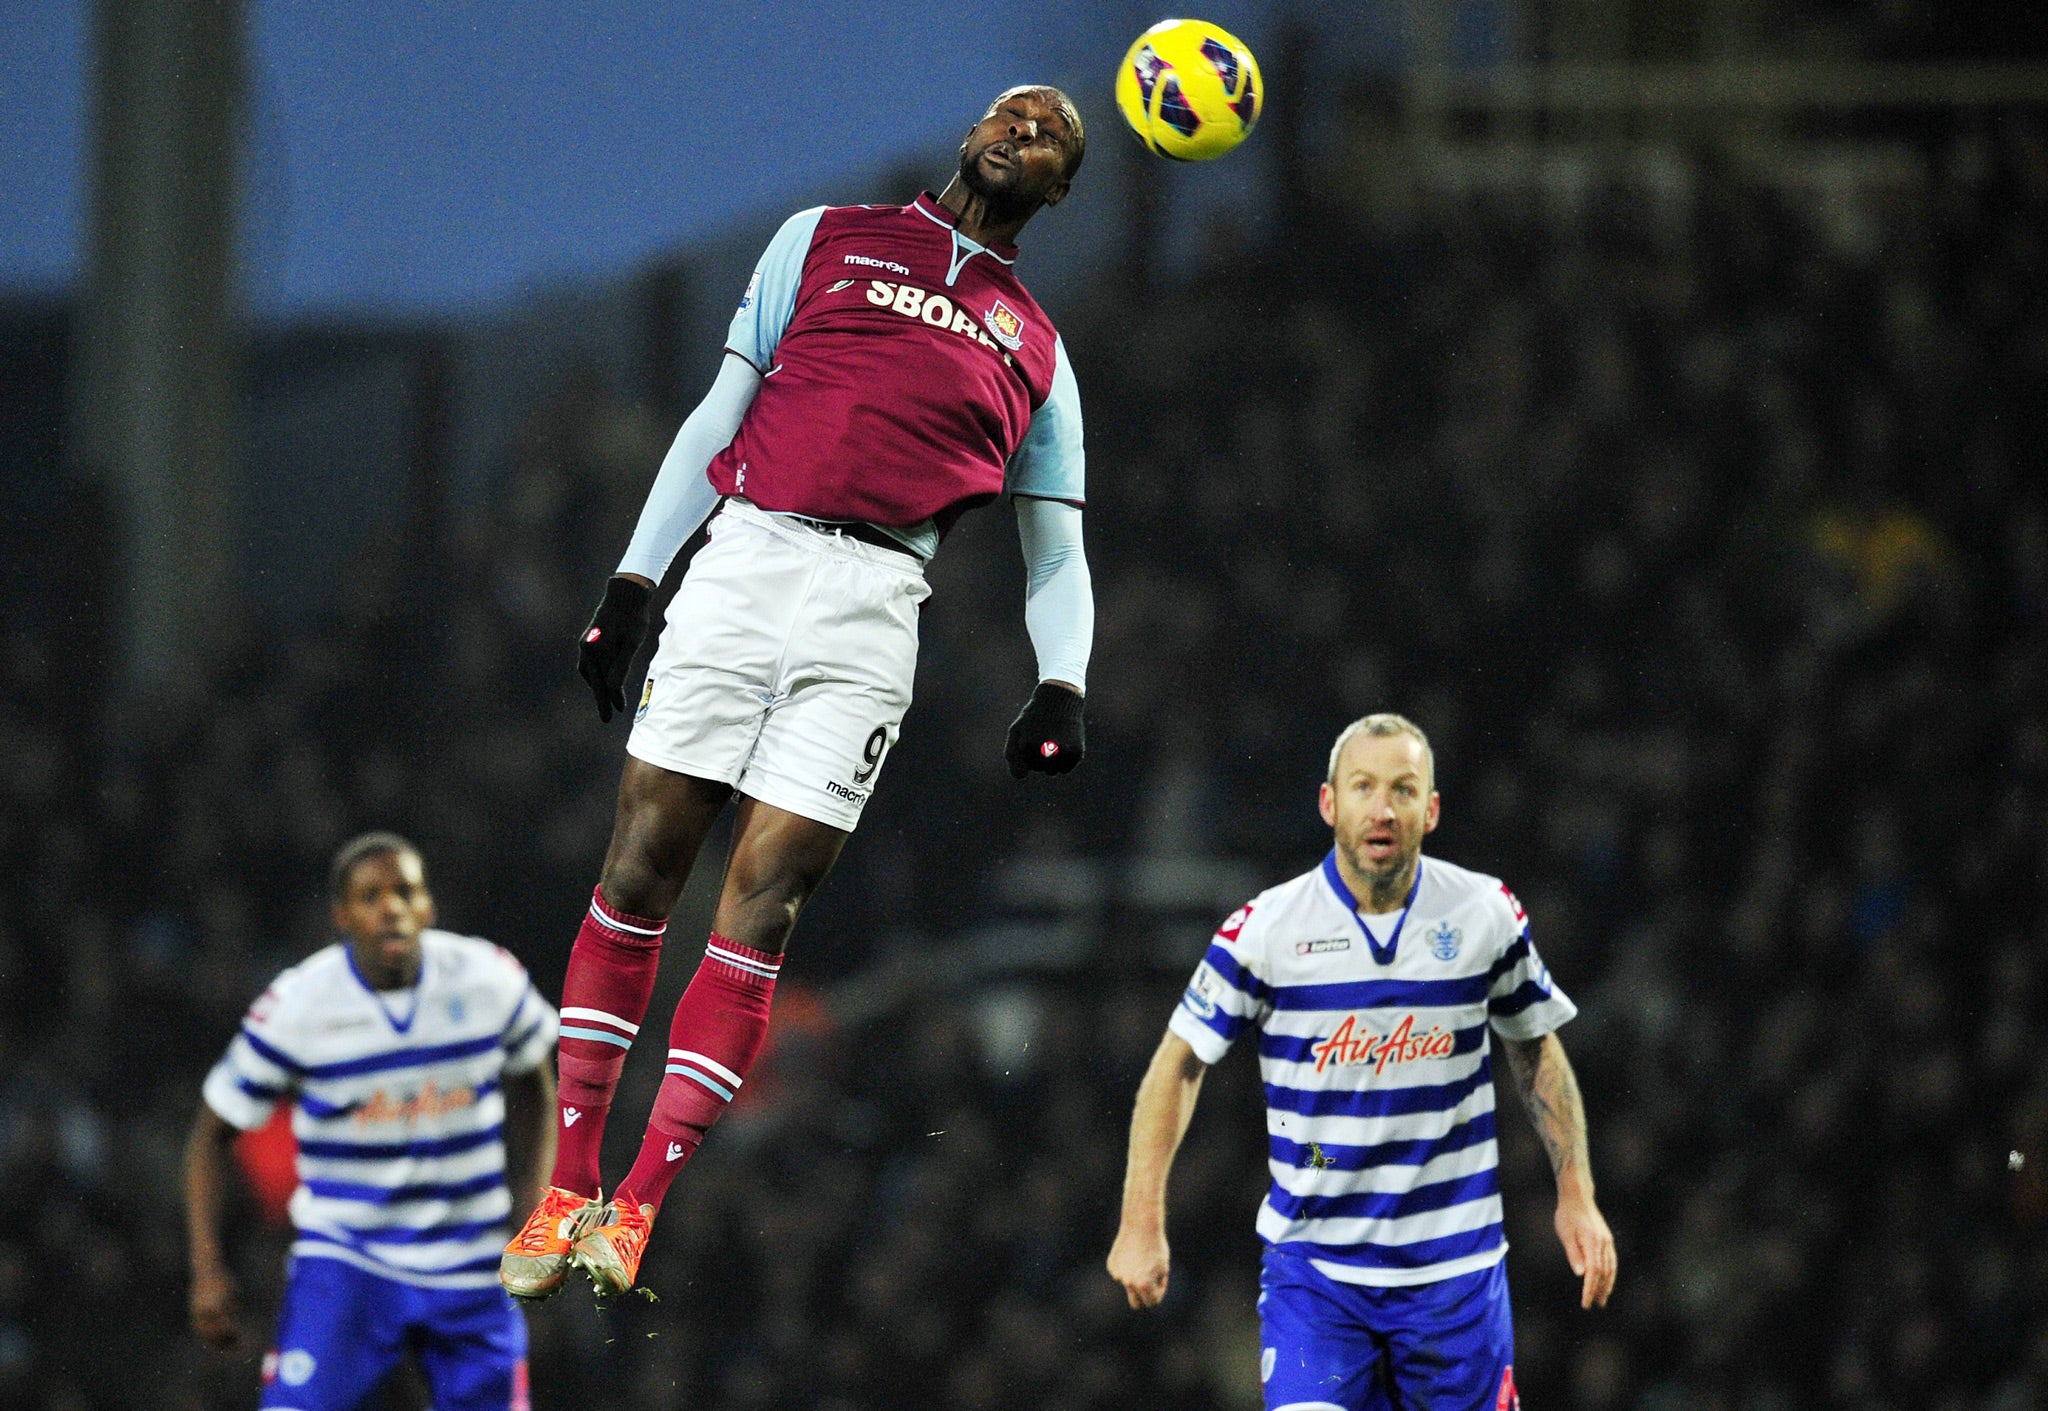 Carlton Cole in action for West Ham against Reading earlier in the season